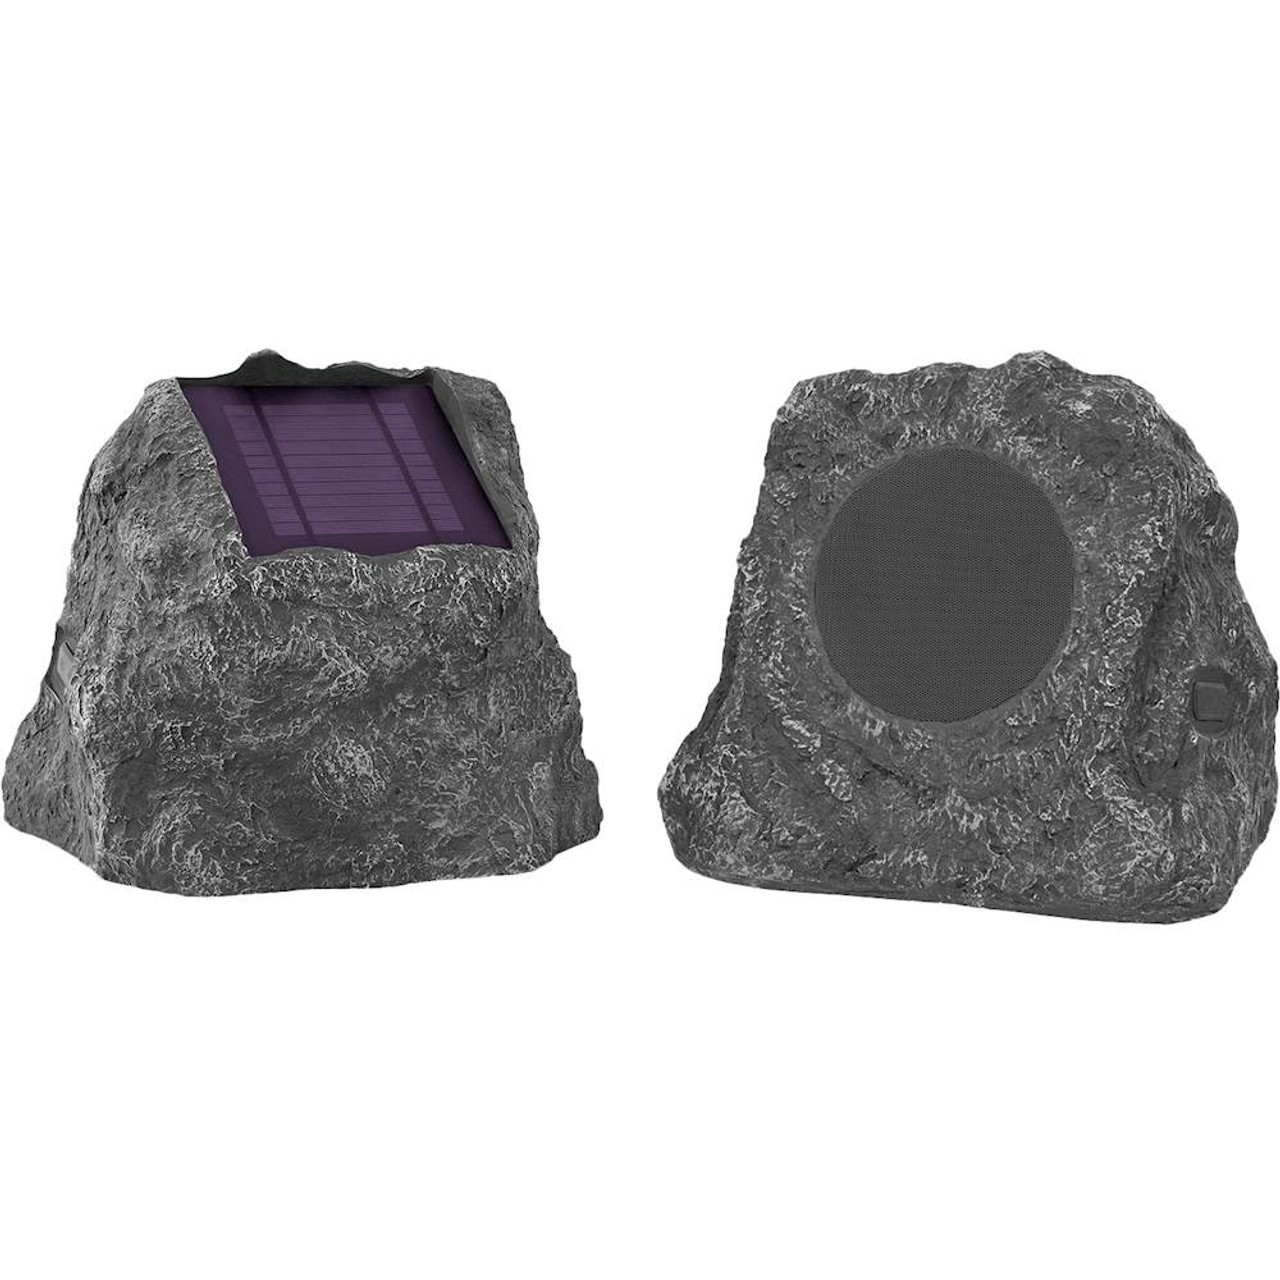 Innovative Technology - Portable Bluetooth Solar Charging Outdoor Speakers (2-Pack) - Gray